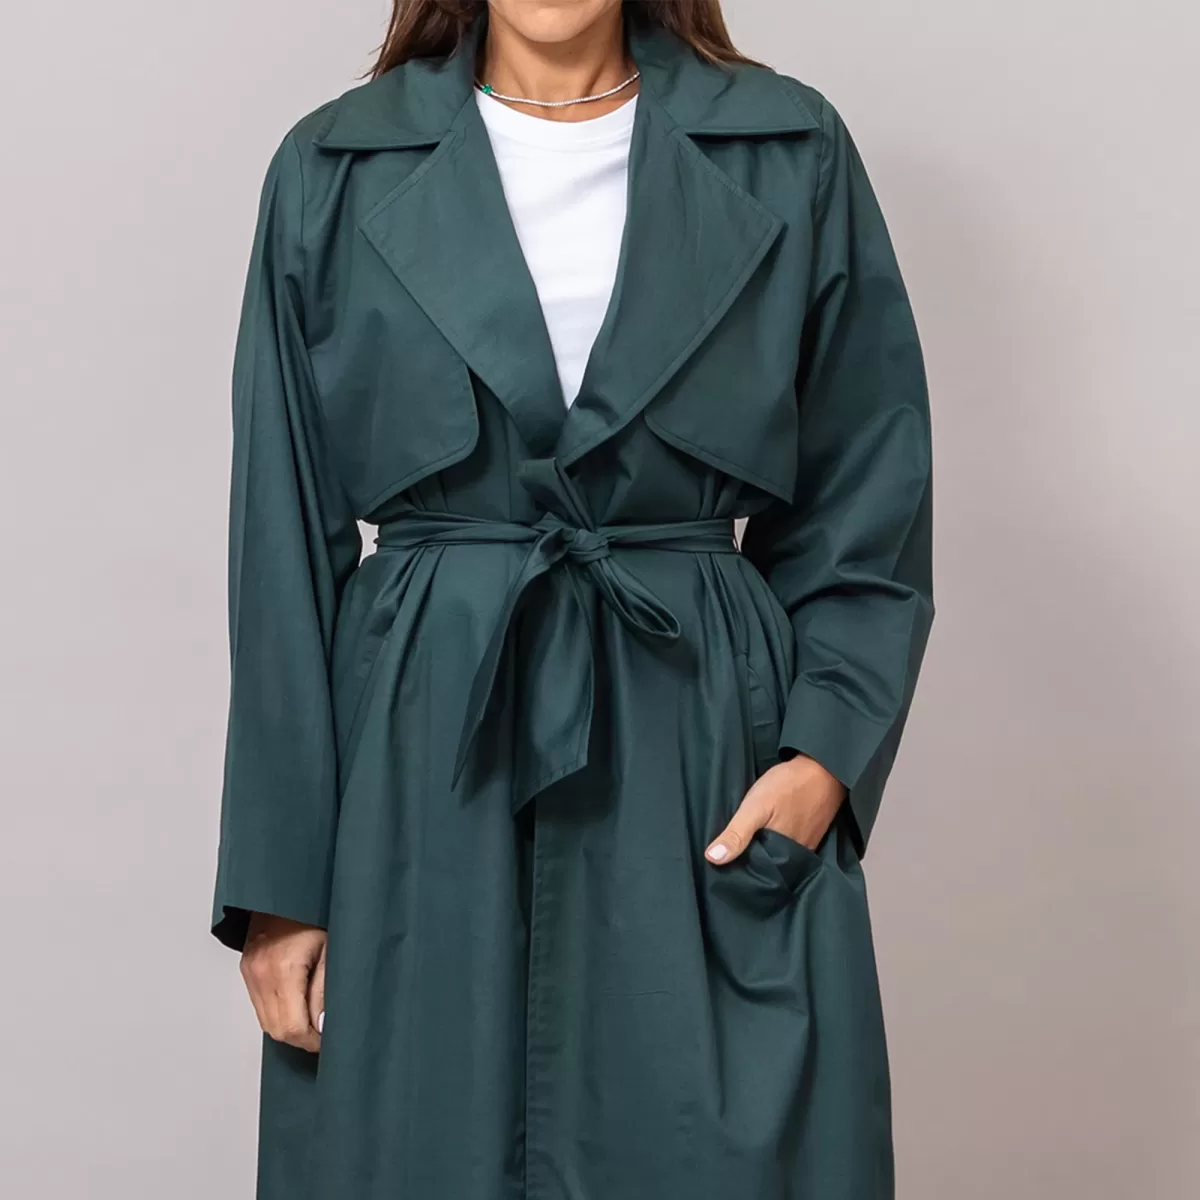 Duster Textured Cotton Viridian Green Coat with Gilet